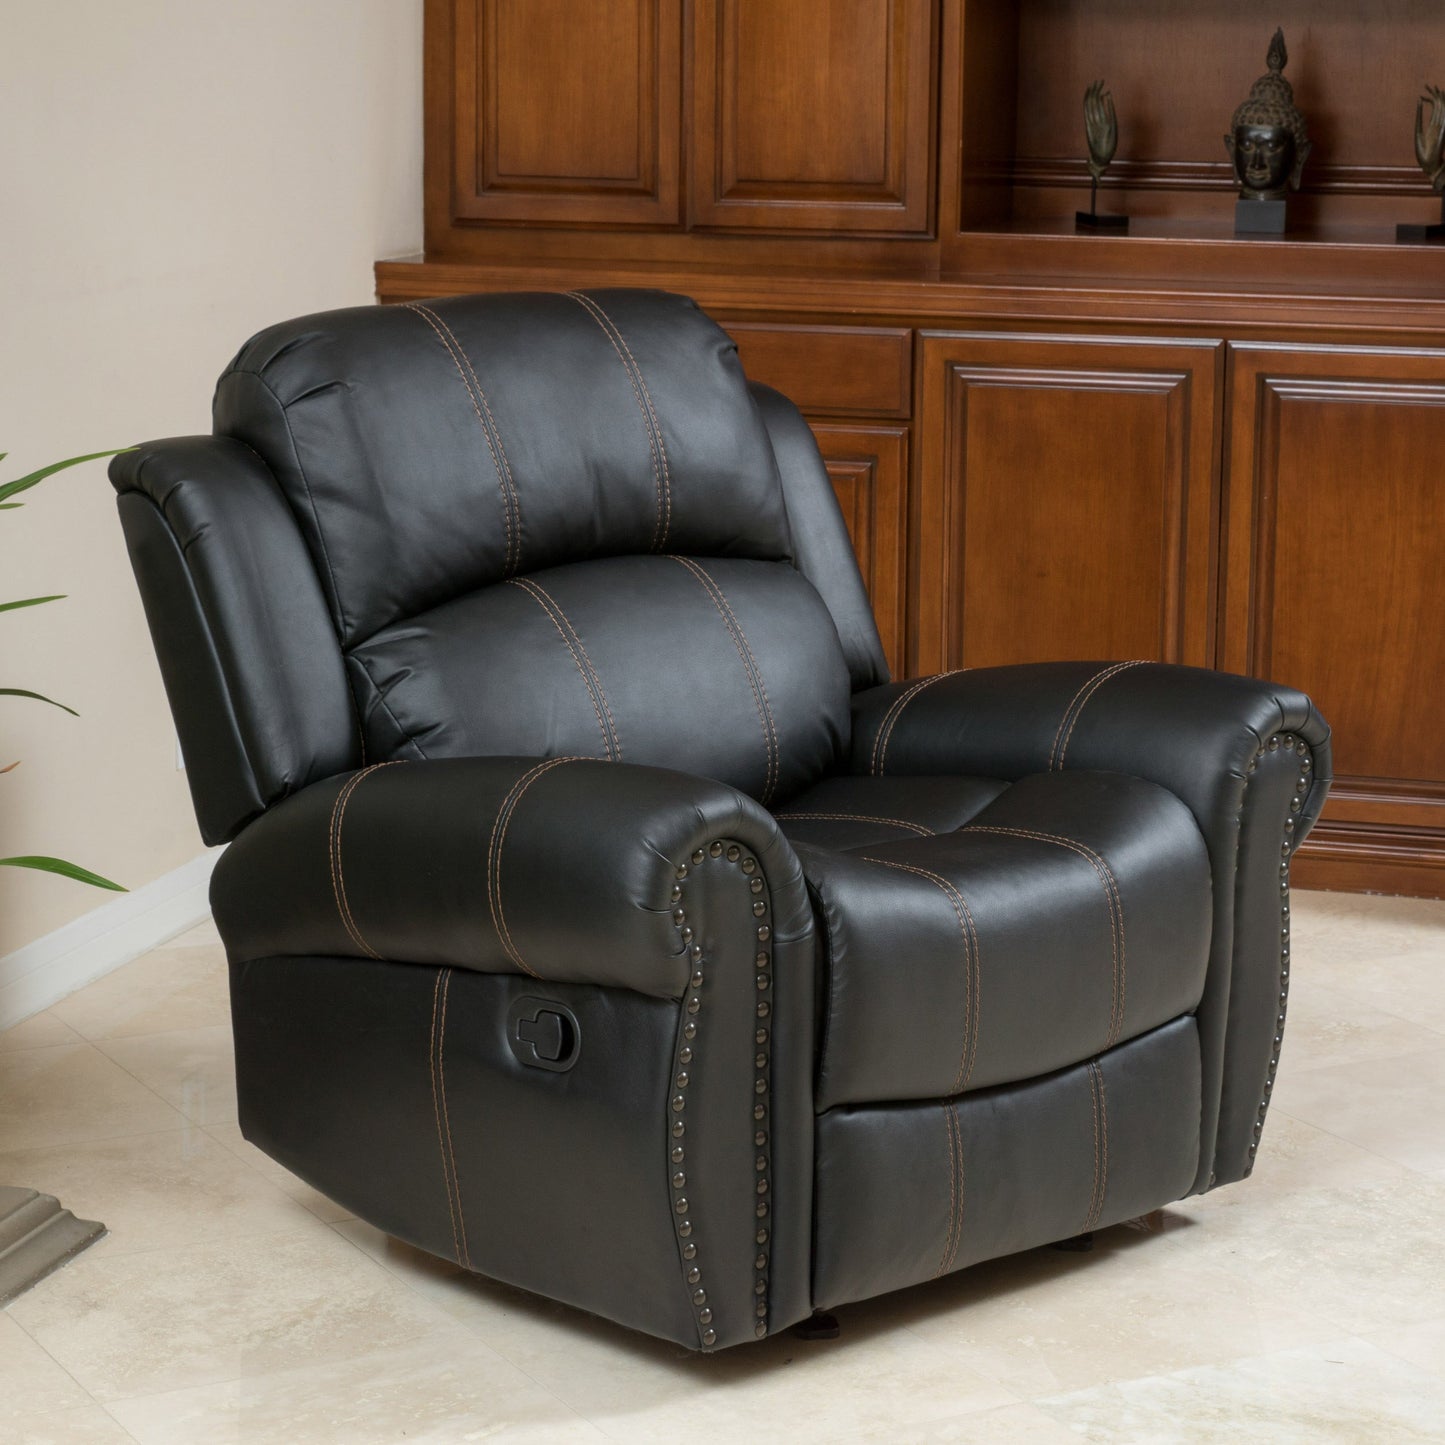 Harbor Contemporary Upholstered Faux Leather Gliding Recliner